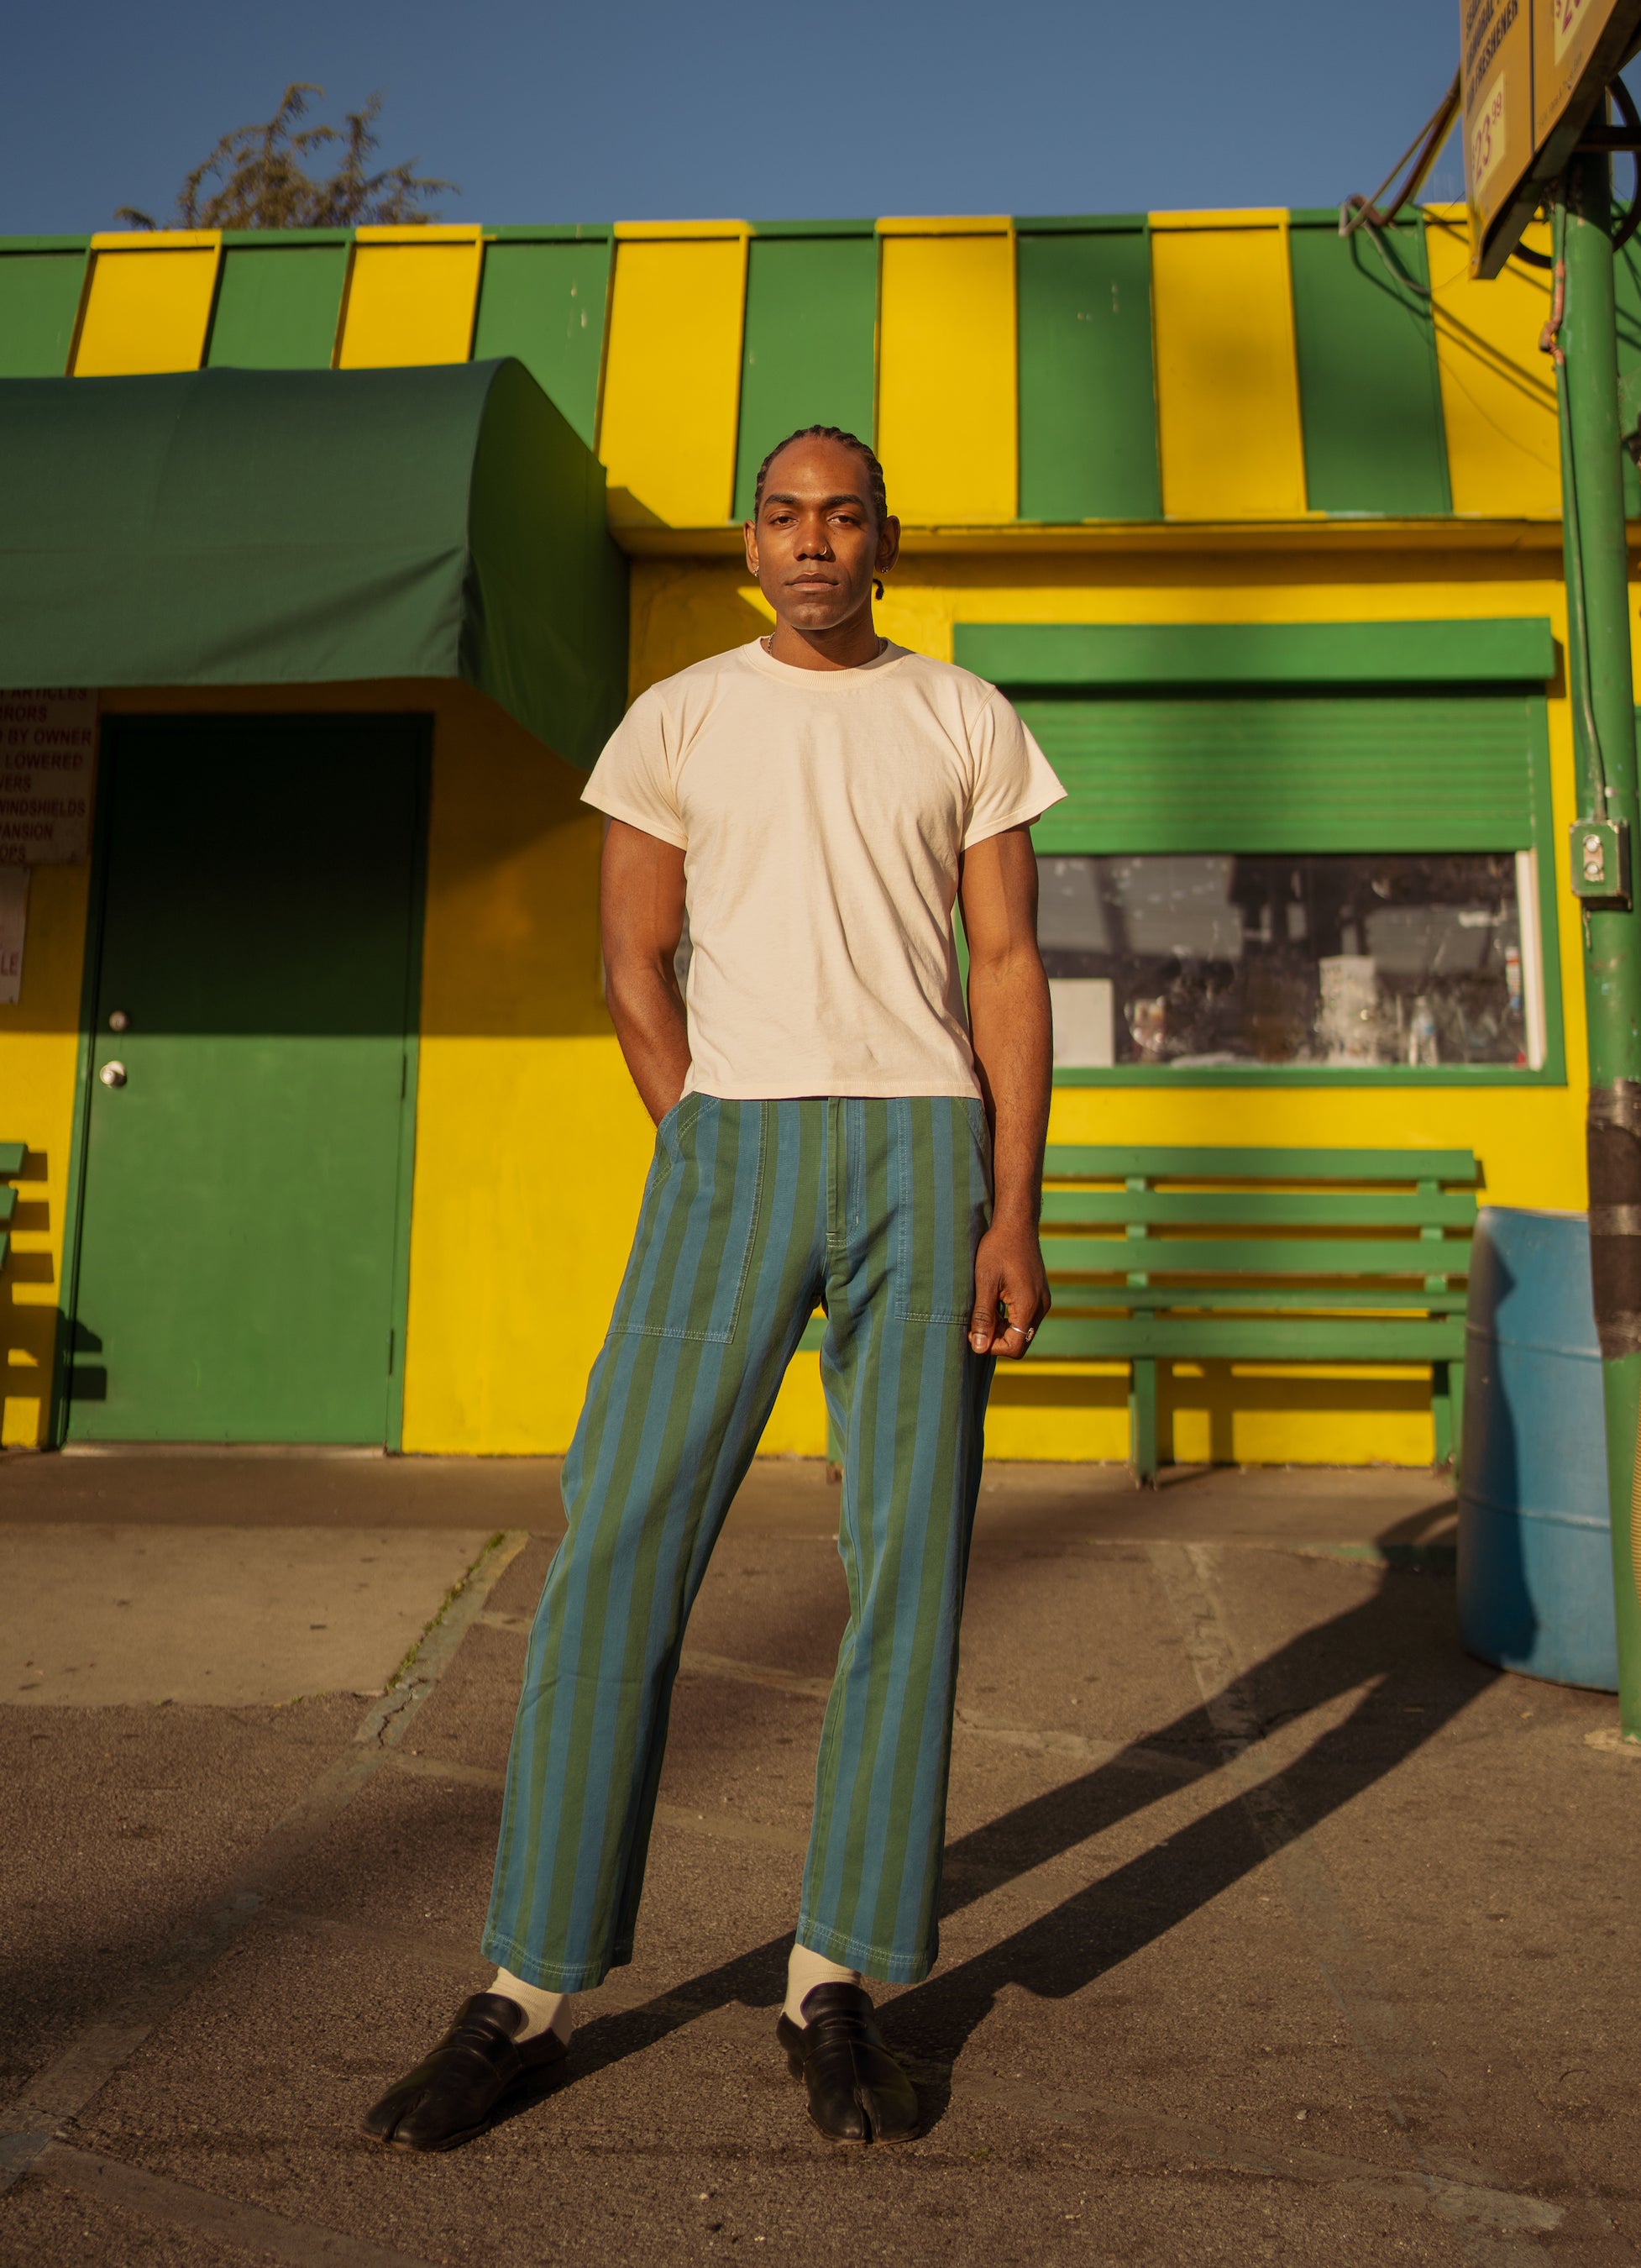 Jerrod is wearing Overdye Stripe Work Pants in Blue/Green and The Organic Vintage Tee in Vintage Off-White